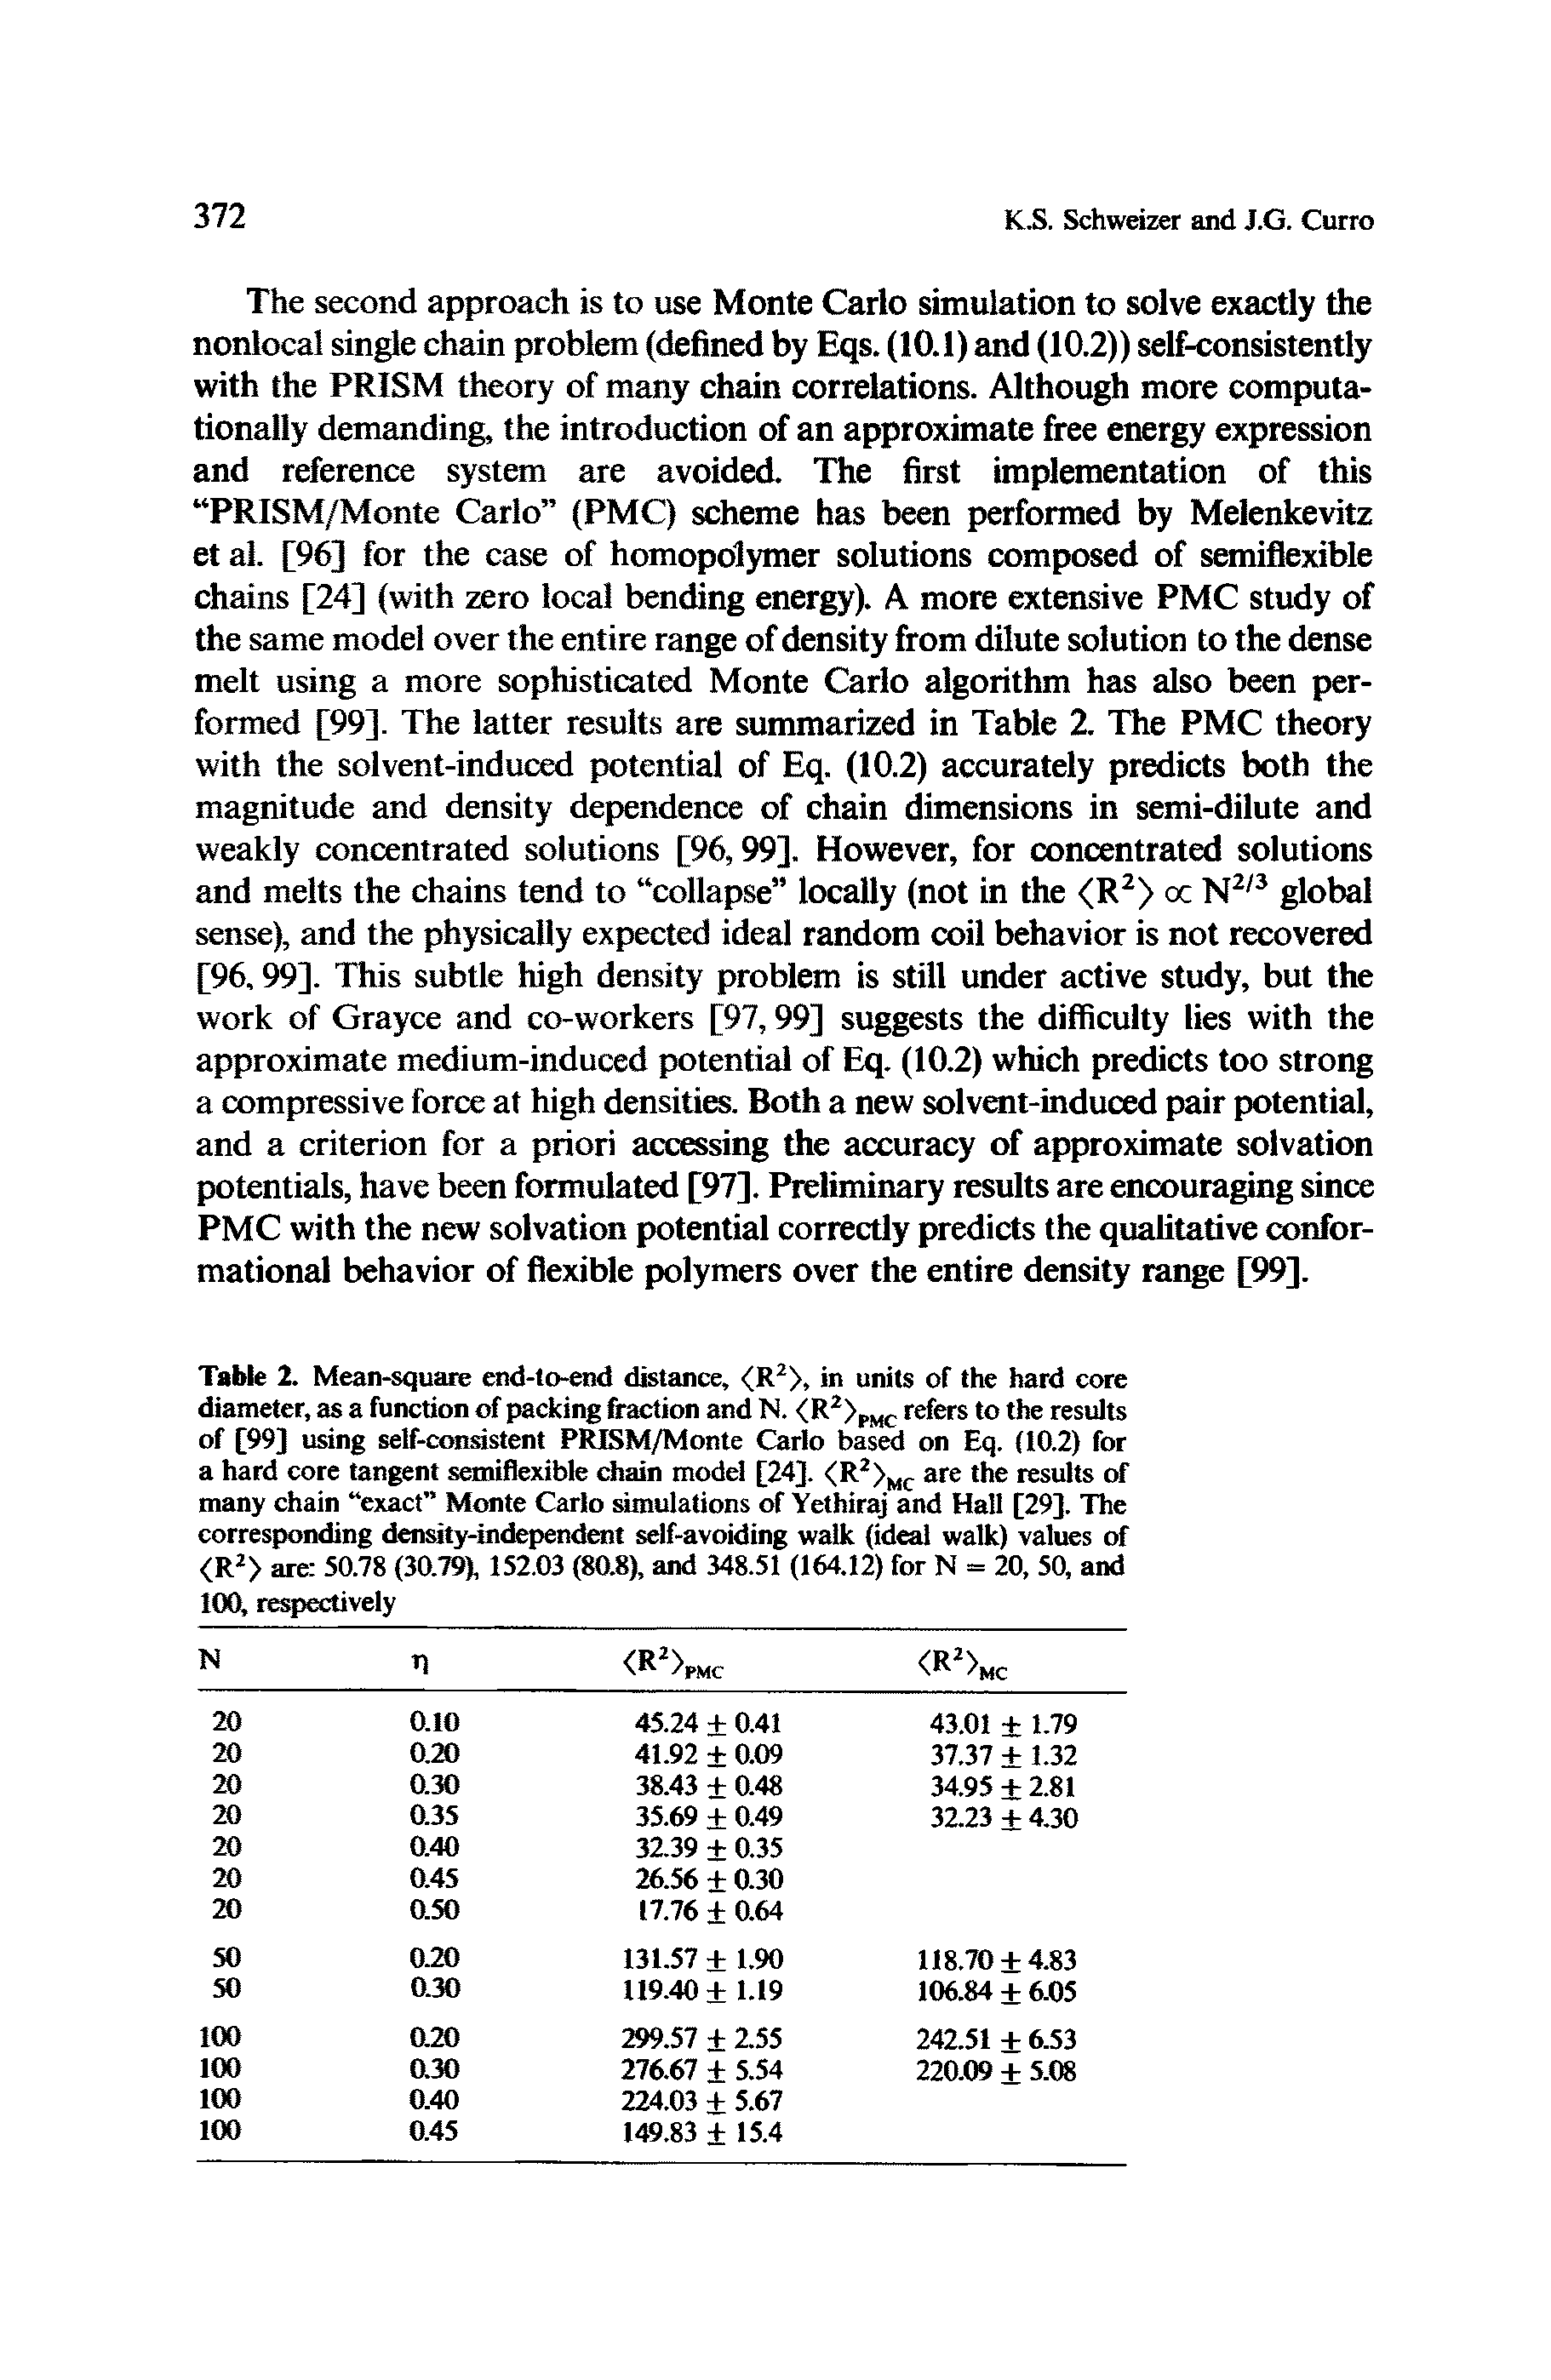 Table 2. Mean-square end-to-md distance, in units of the hard core diameter, as a function of packing fraction and N. <R >pmc f the results of [99) using self-consistent PRESM/Monte Carlo based on Eq. (10.2) for a hard core tangent semiflexible chain model [24]. <R > c are the results of many chain exact Monte Carlo simulations of Yethiraj and Hall [29]. The corresponding density-independent self-avoiding walk (ideal walk) values of <R > are 50.78 (30.79), 152.03 (80.8), and 348.51 (164.12) for N = 20, 50, and MX), respwlively...